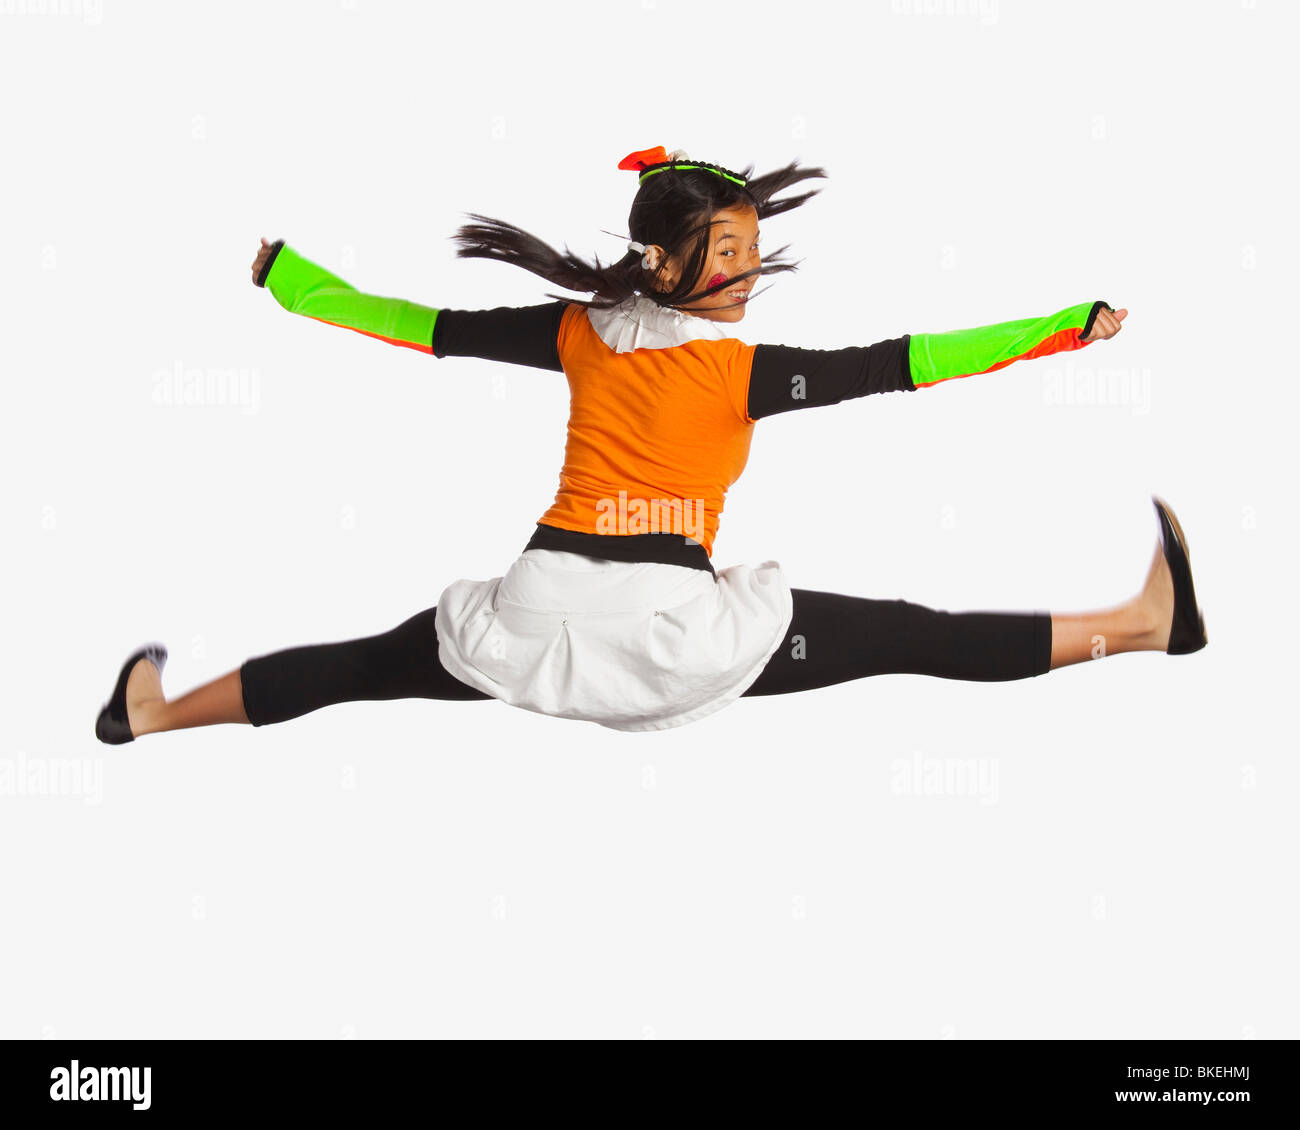 Girl Jumping With Legs And Arms Outstretched Stock Photo